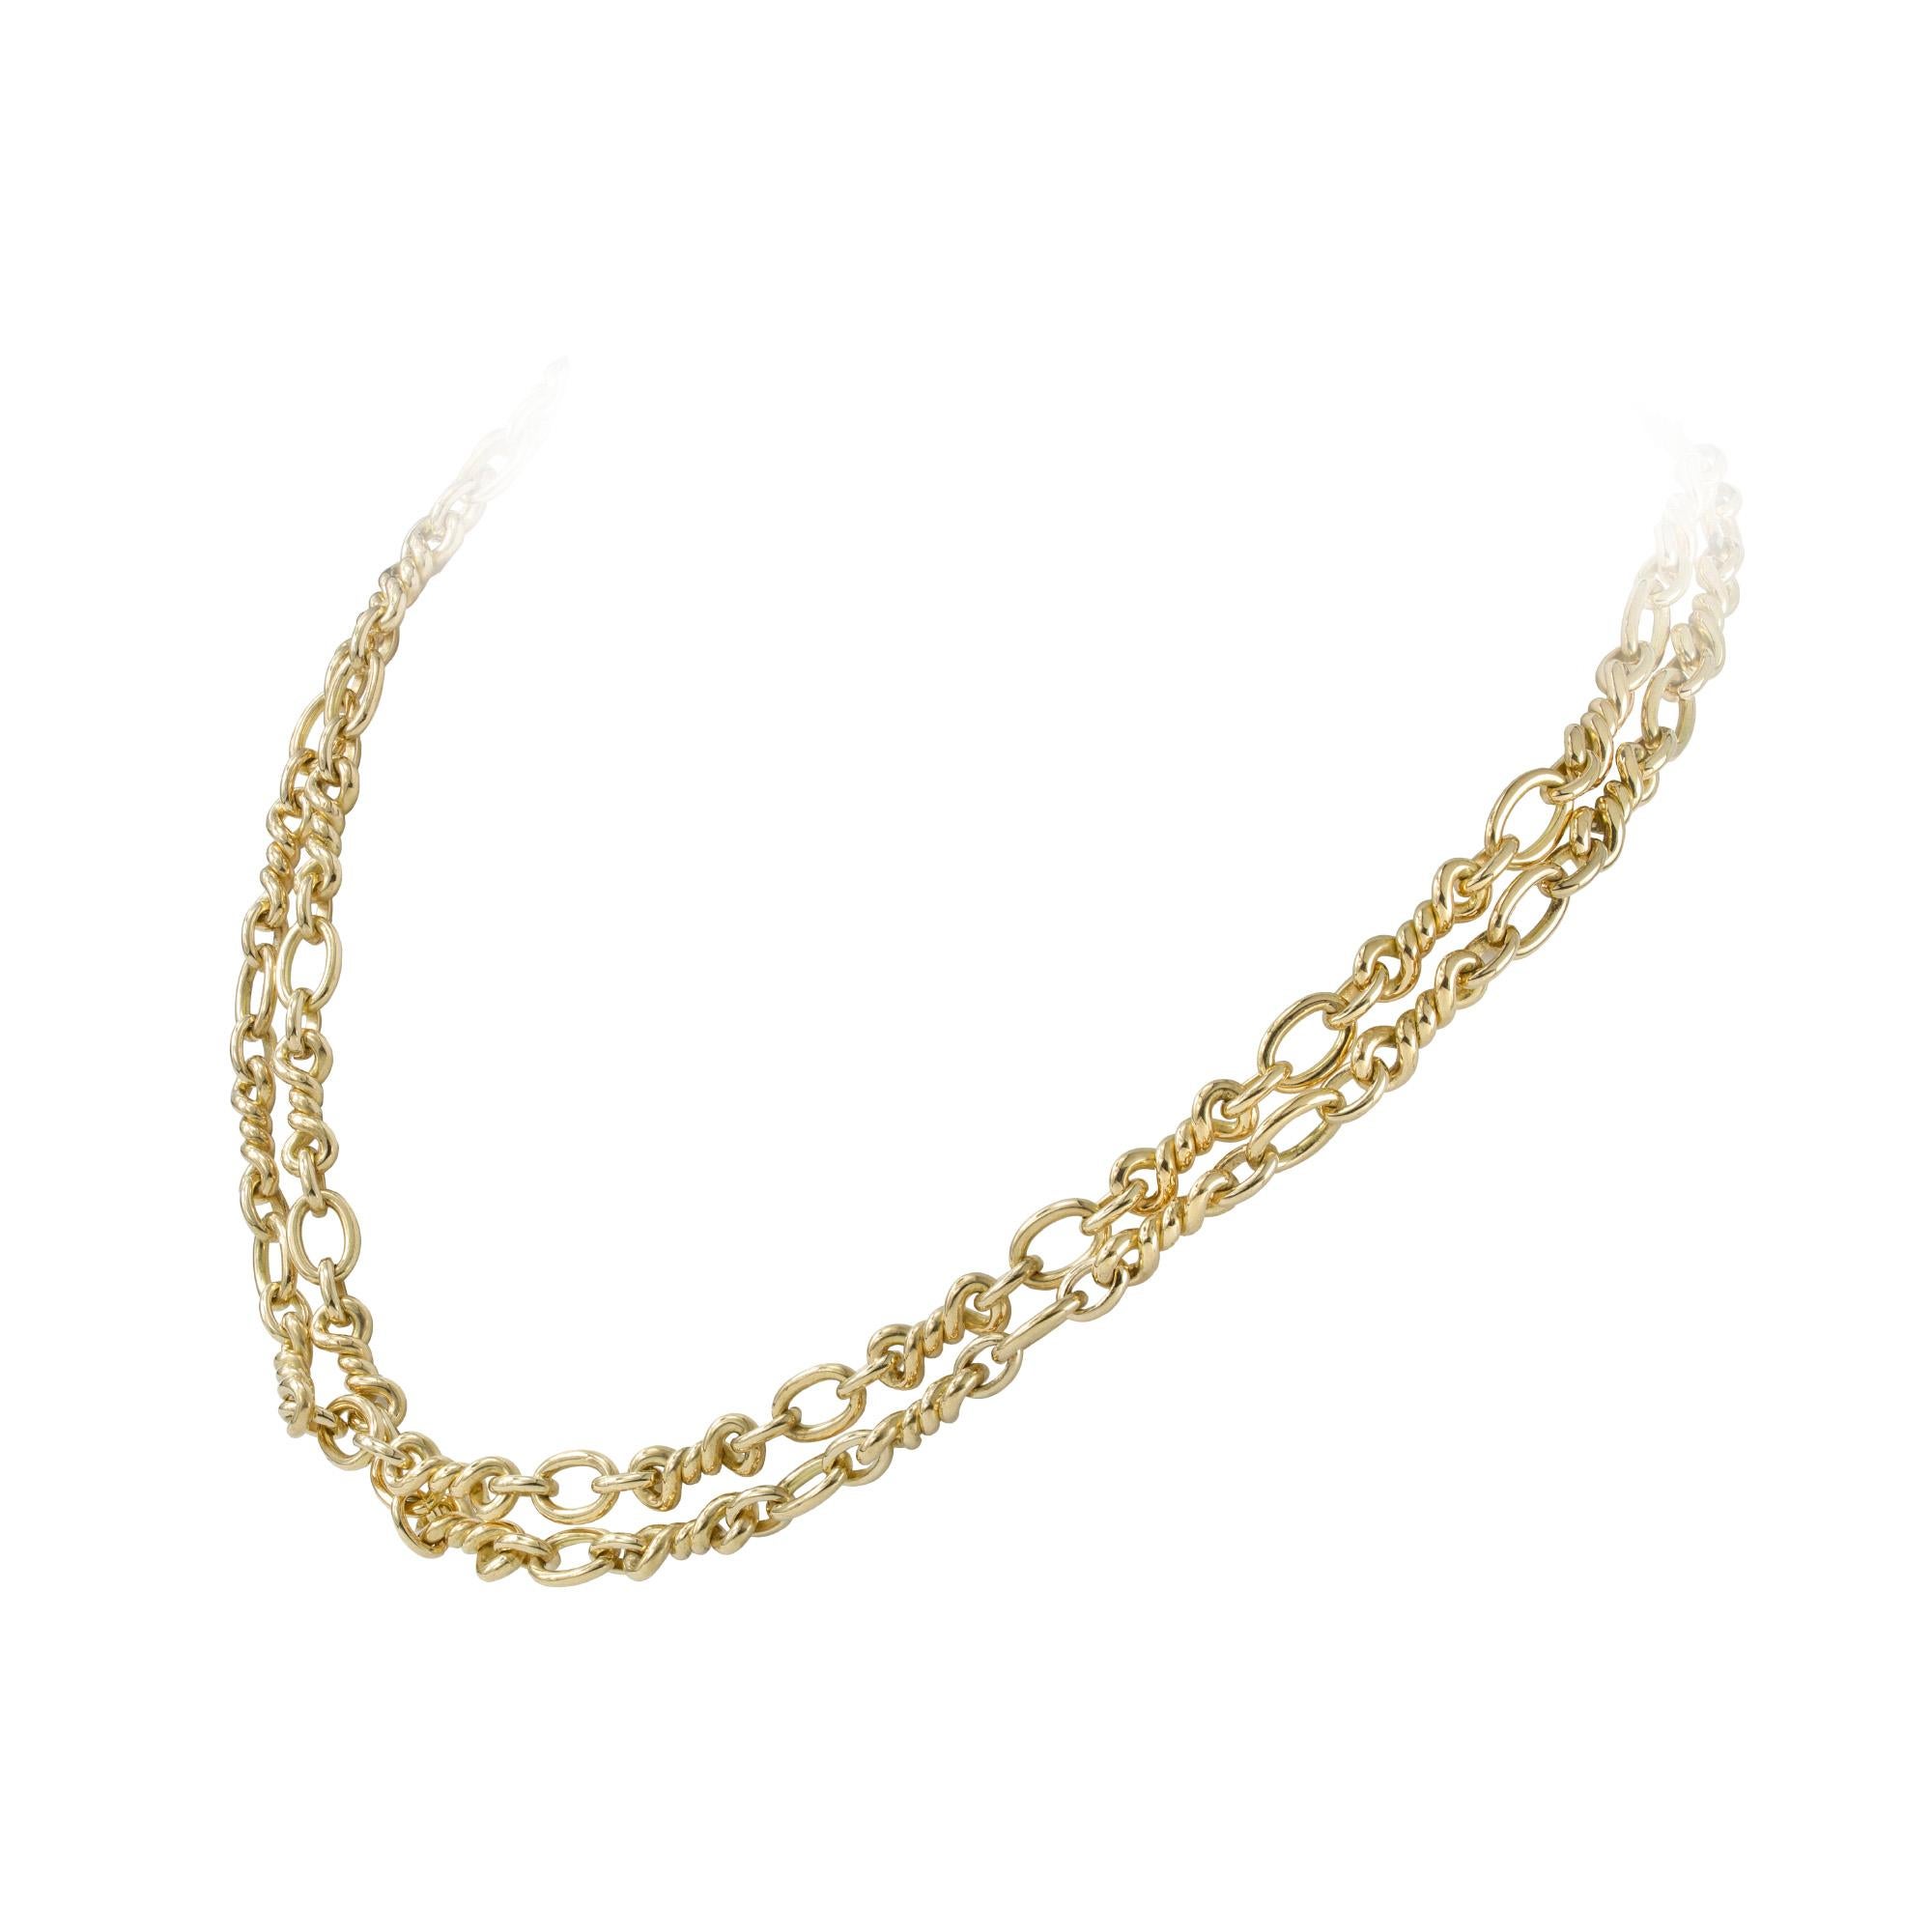 A fancy twist link gold chain, the long chain consisting of a twisted link to a three graduated belcher link pattern, hallmarked 18ct gold, London 1976, measuring approximately 86cm in length, gross weight 80.3 grams.

This chain is in excellent